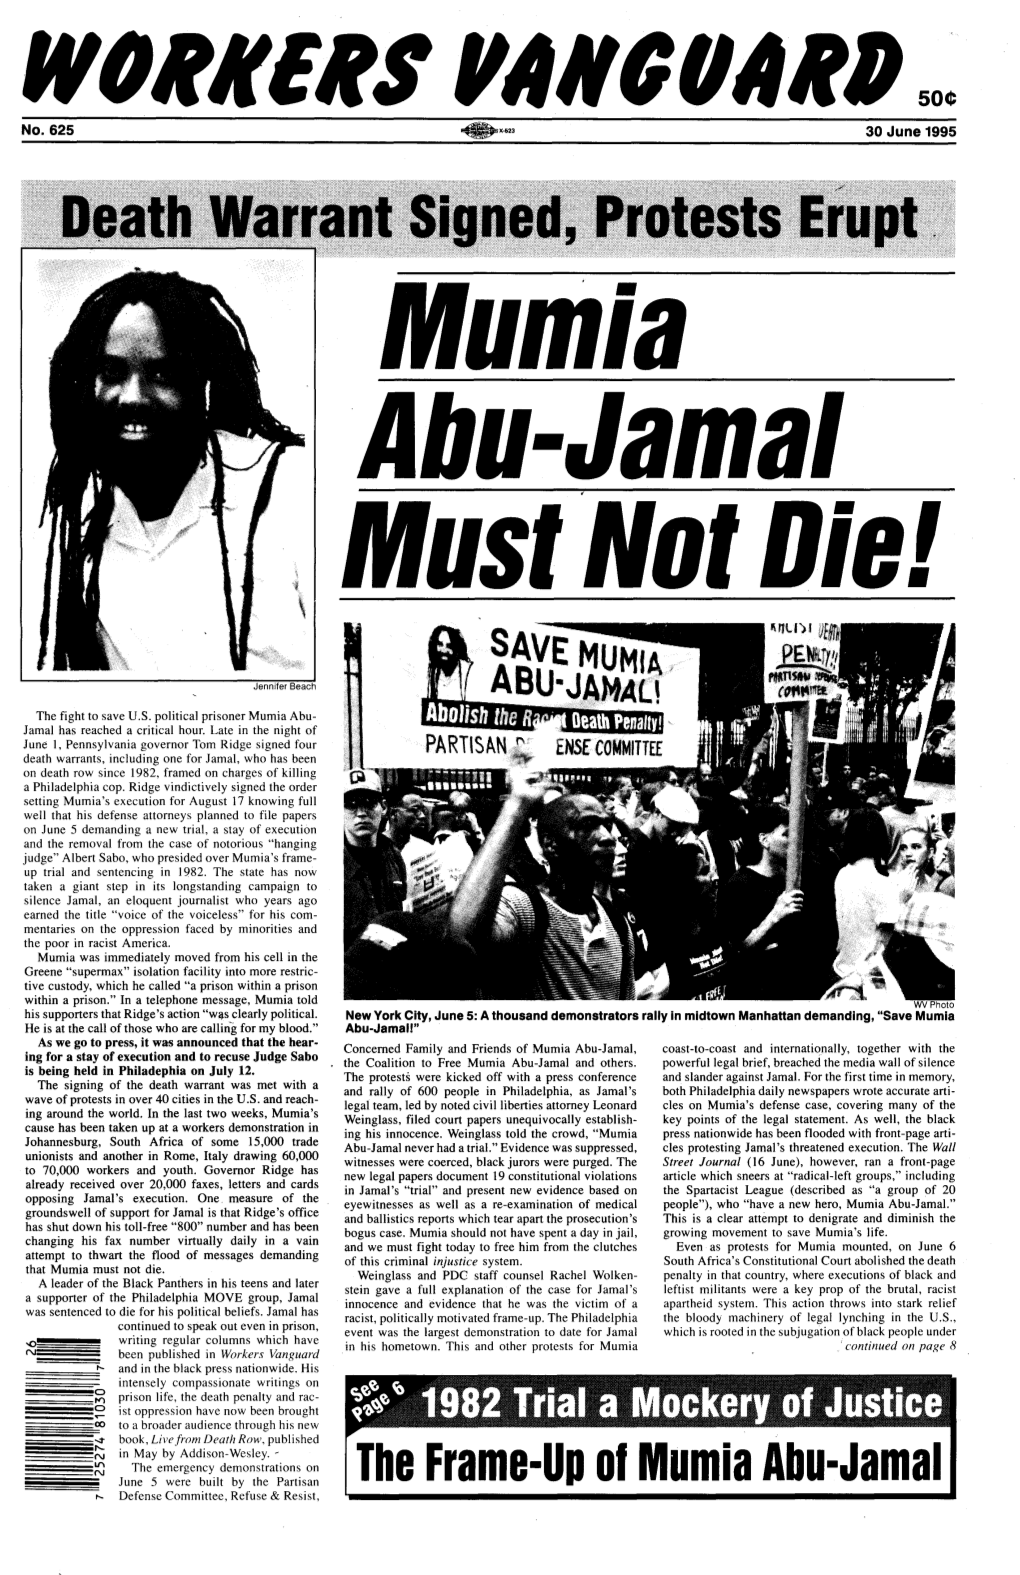 The Frame-Up 01 Mumia Abu-Jamal R-- Defense Committee, Refuse & Resist, Mobilize Labor Against Raeistcop'· Terror! S.F